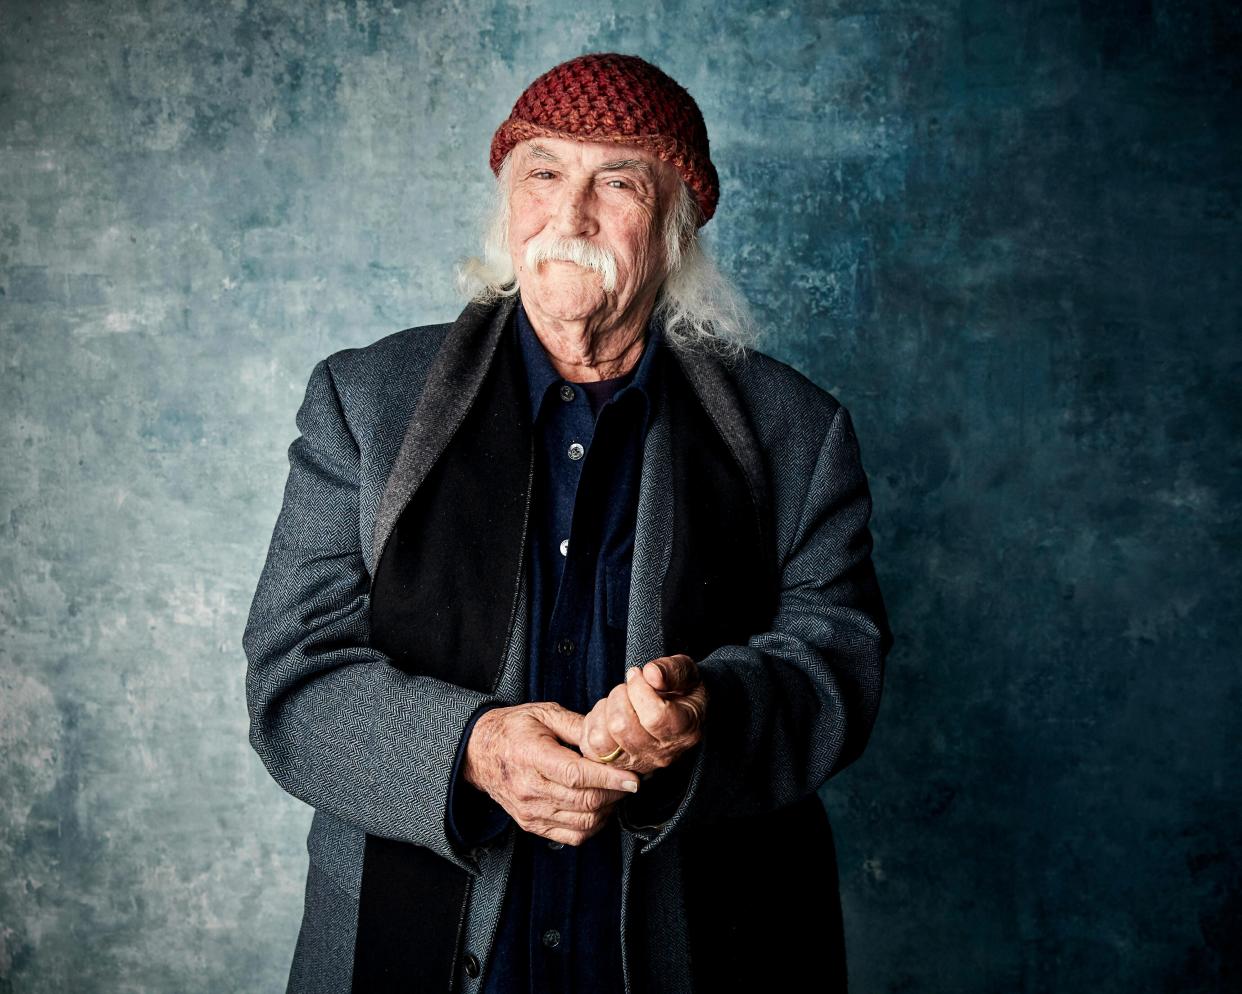 Musician David Crosby has died at age 81, according to various sources. He was a founding member of the bands the Byrds and Crosby, Stills & Nash that helped usher in the folk - rock genre in the 1960s. Crosby's vocal harmonies also graced the recordings of Joni Mitchell, Jackson Browne, James Taylor, Carole King, Phil Collins and Elton John among many others. Here Crosby poses for a portrait to promote the documentary film "David Crosby: Remember My Name" at the Salesforce Music Lodge during the Sundance Film Festival in Park City, Utah. Crosby offers candid reflections on his career, relationships and feuds with others in the new film.